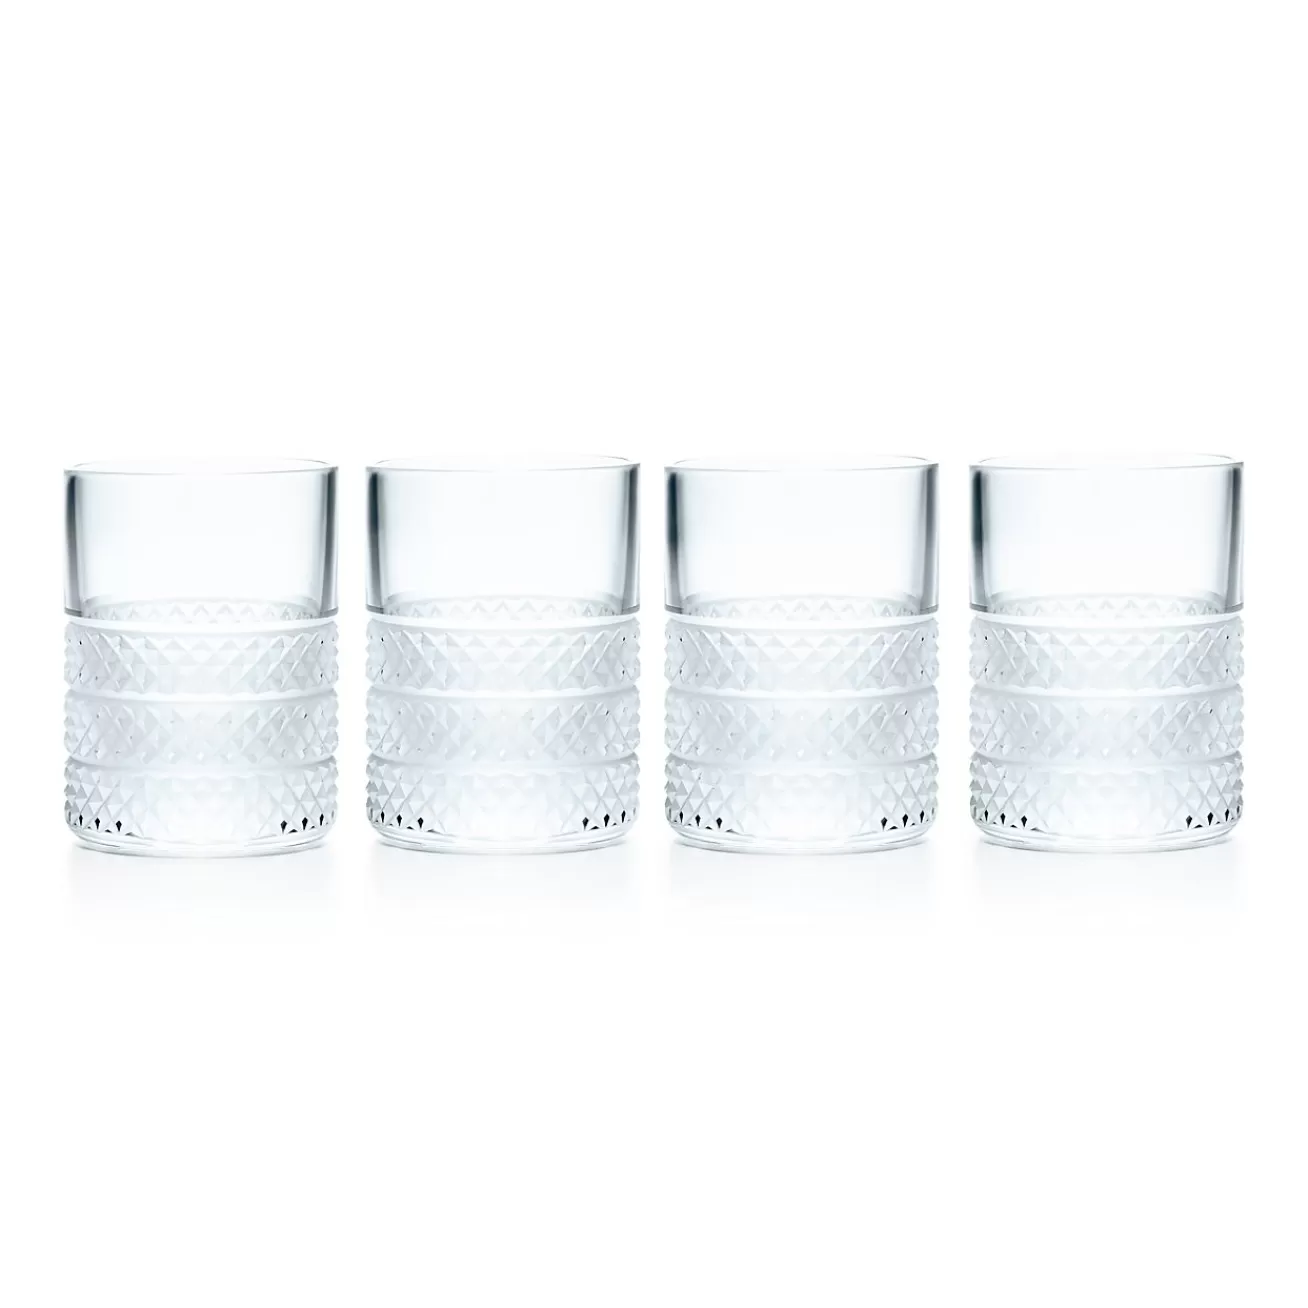 Tiffany & Co. Diamond Point shot glasses in clear crystal glass, set of four. | ^ The Home | Housewarming Gifts